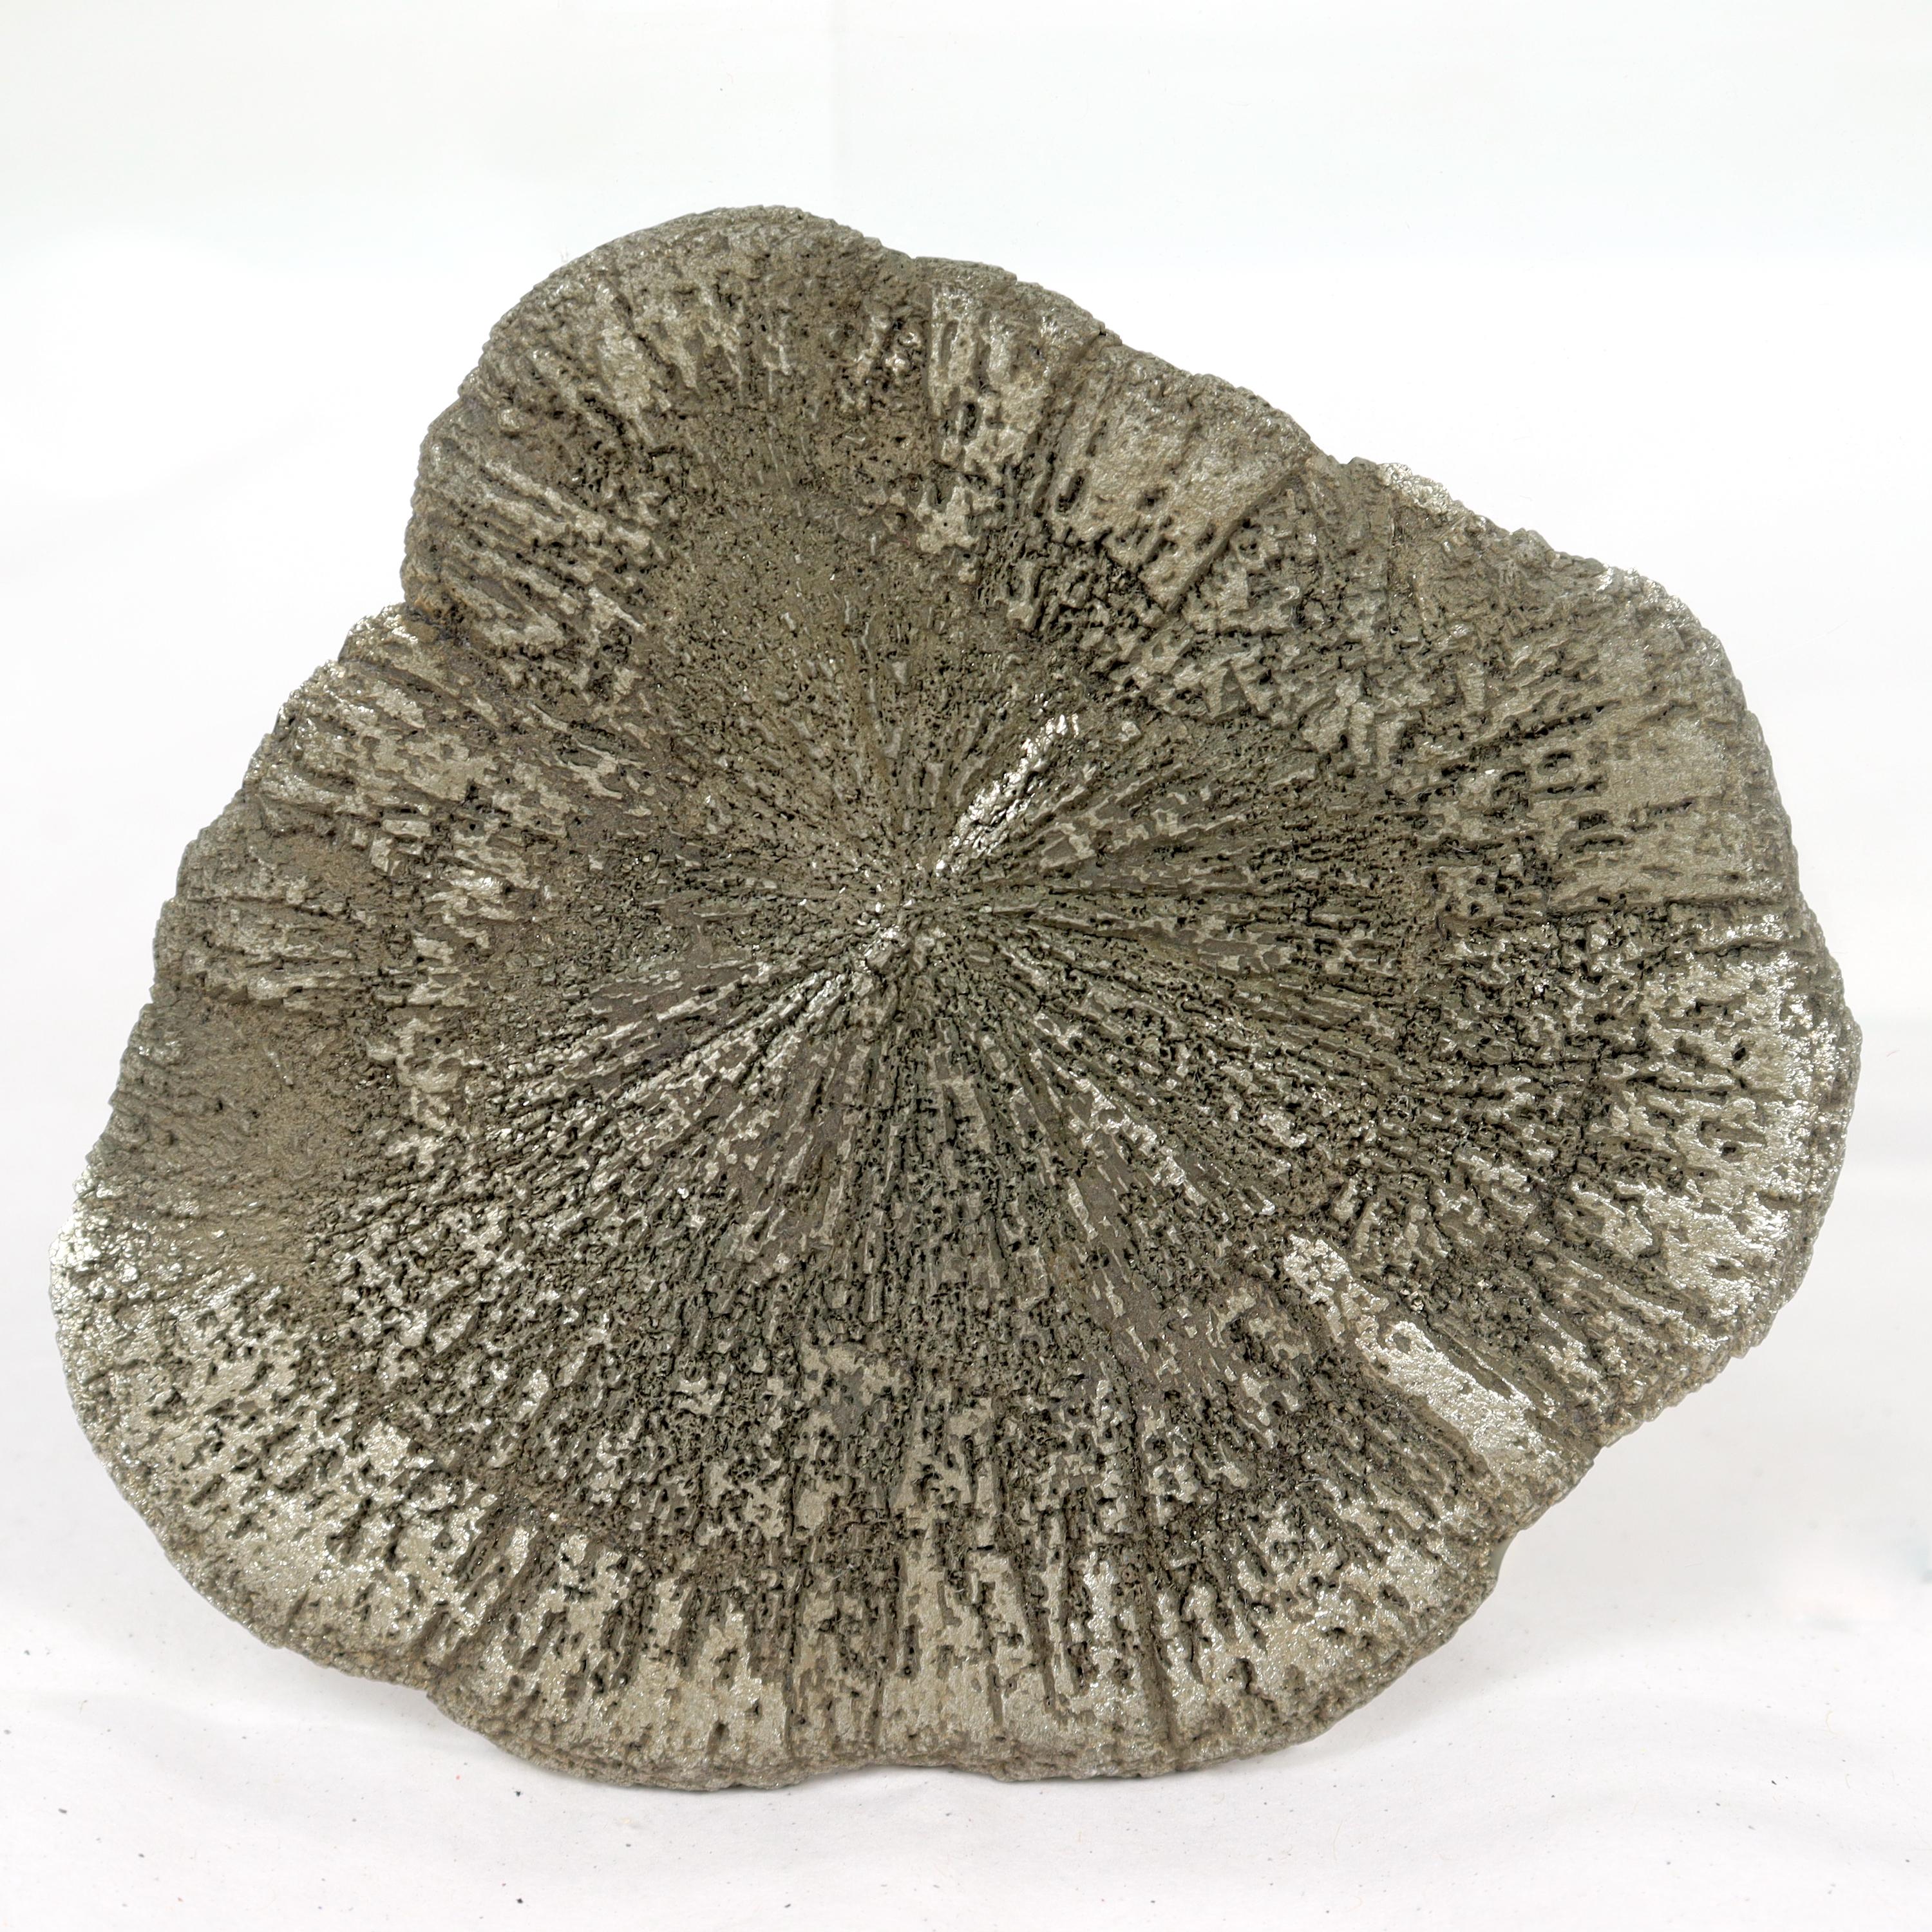 A fine pyrite paperweight.

In the form of a flattened pyrite (or fool's gold) specimen.

Simply a great paperweight!

Date:
20th Century

Overall Condition:
It is in overall good, as-pictured, used estate condition with some fine & light surface